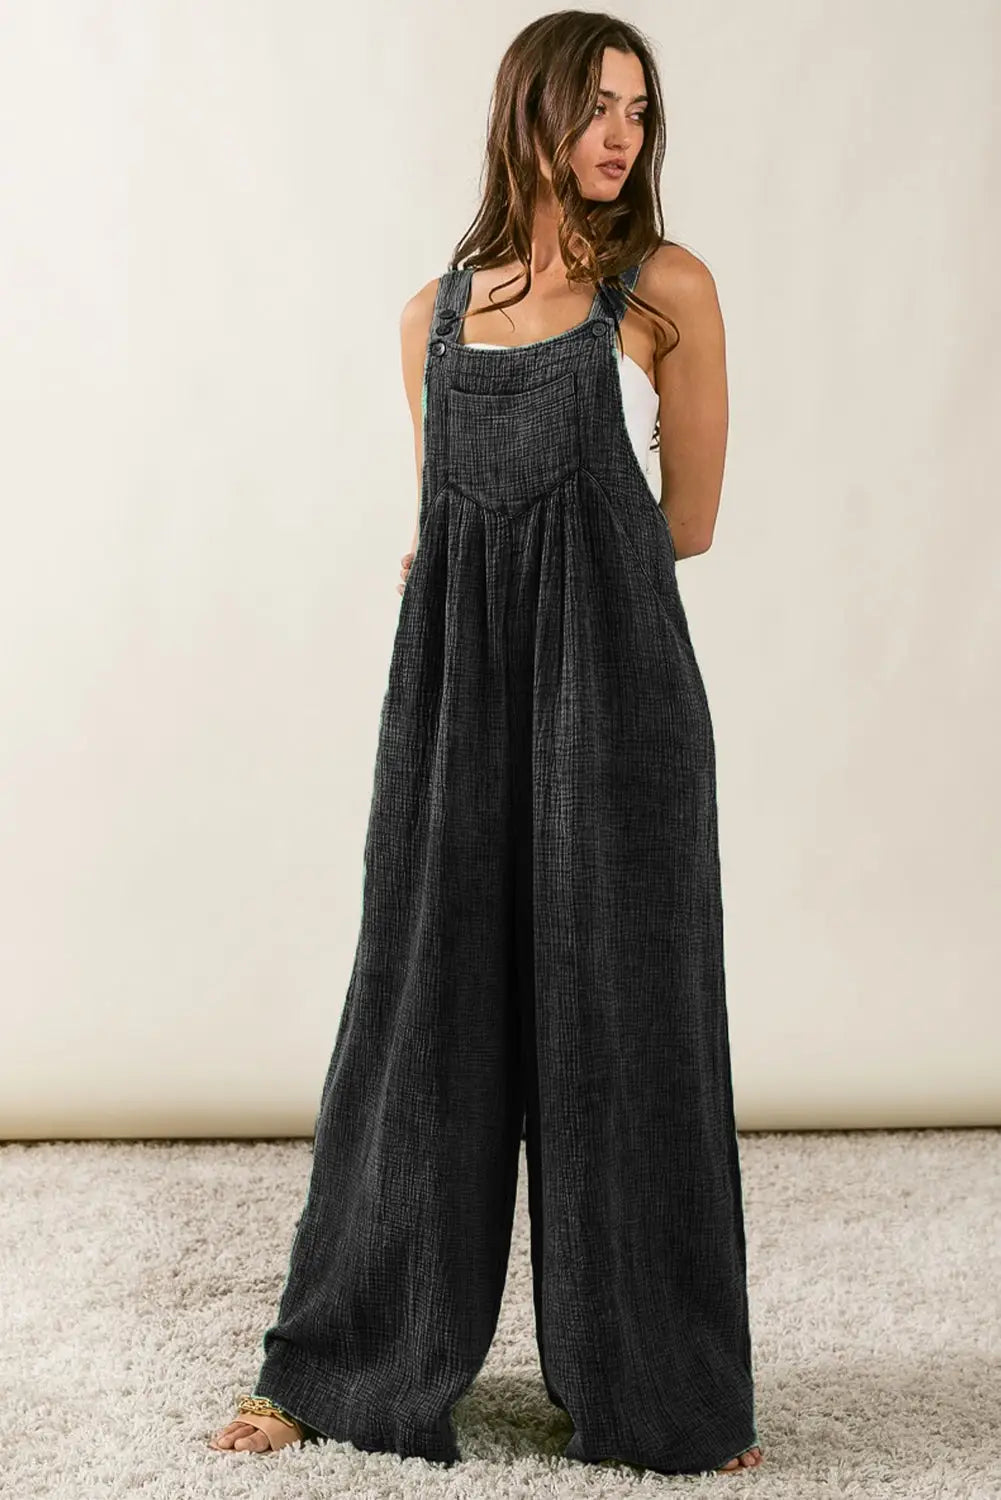 Black textured wide leg overalls - jumpsuits & rompers